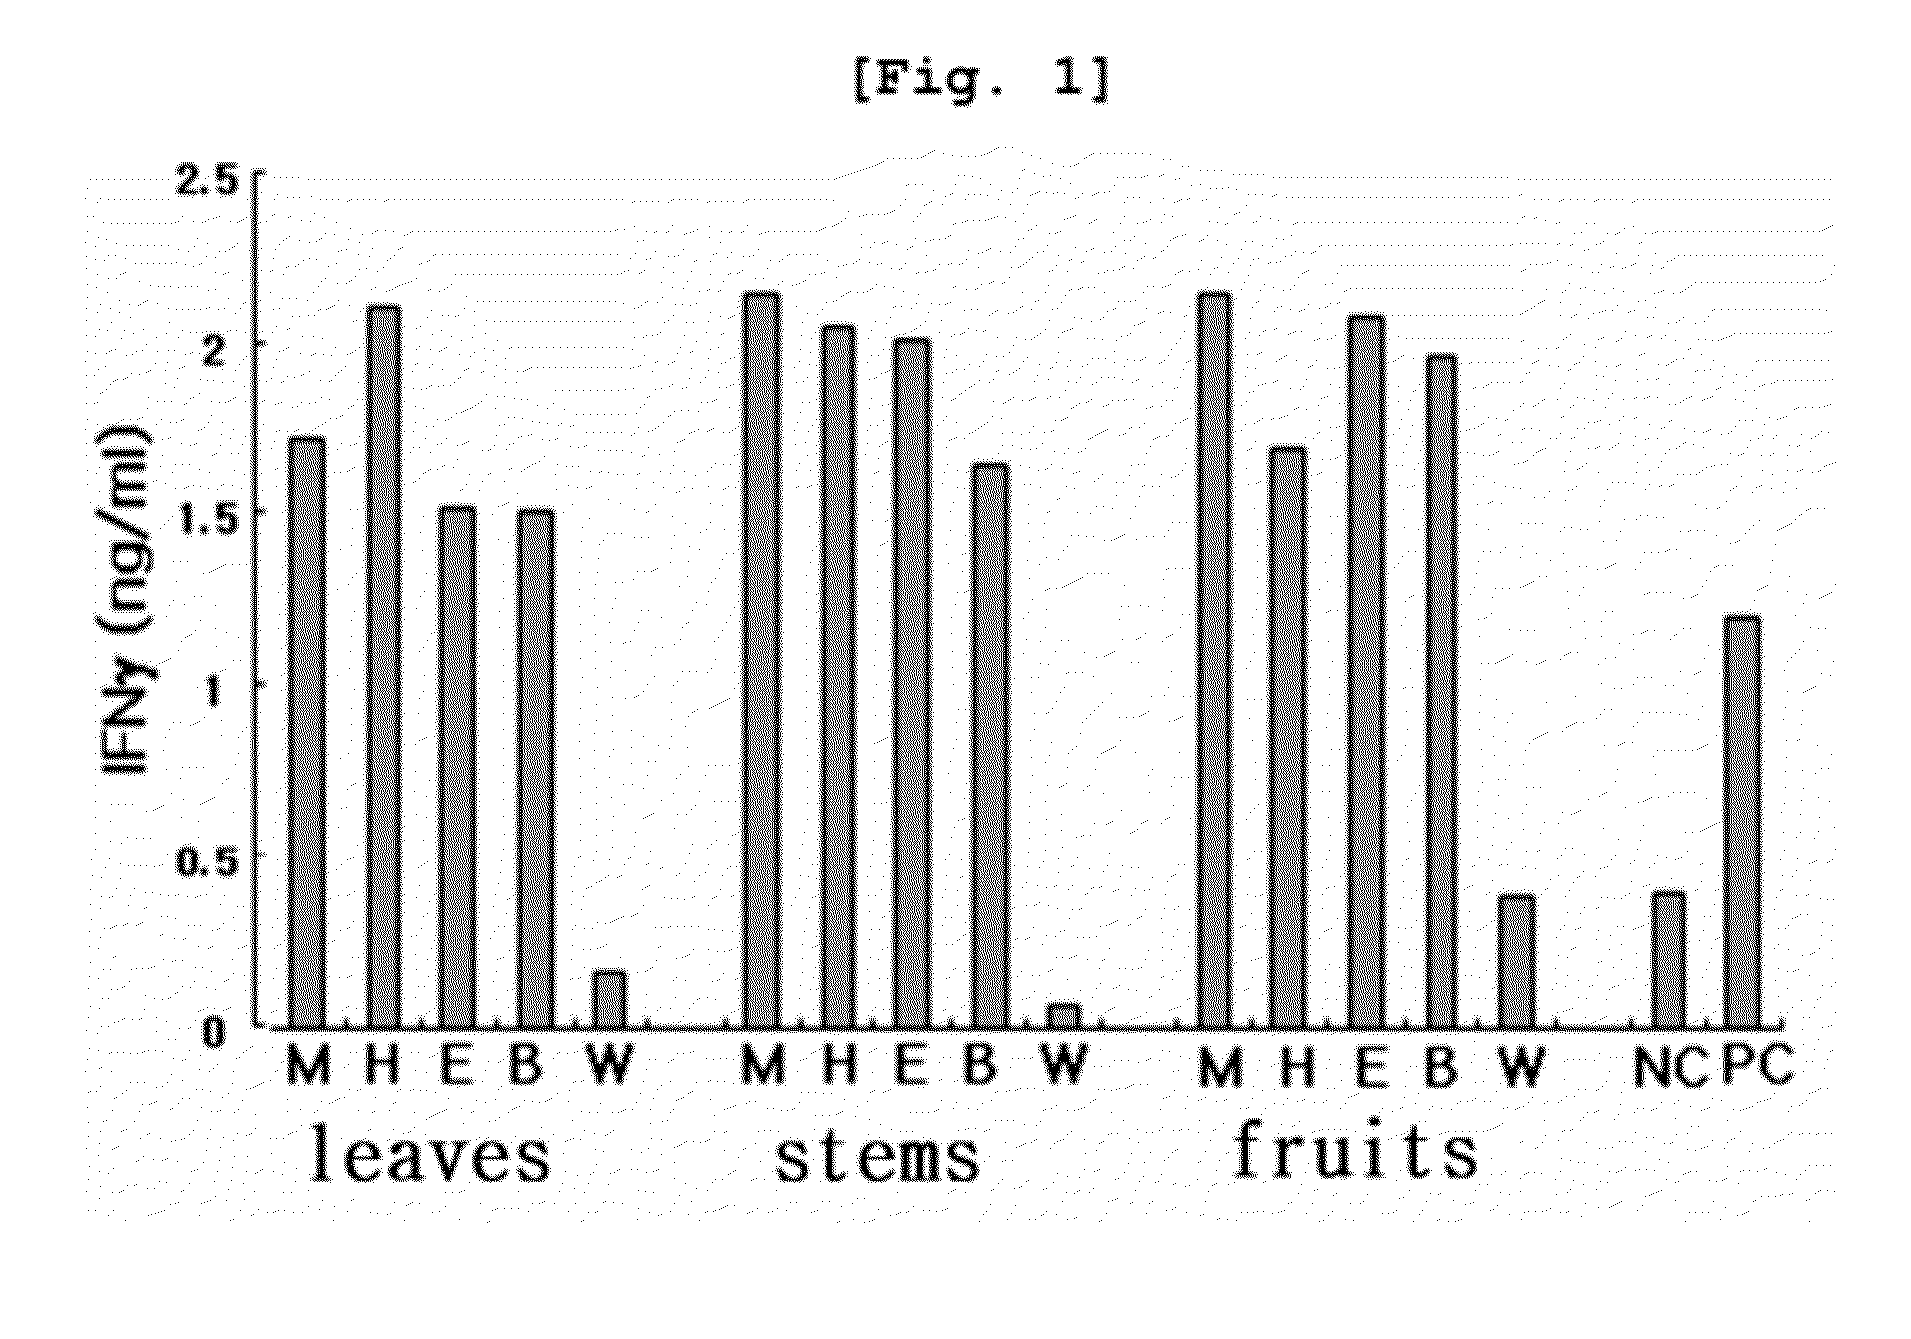 Antiviral composition containing an aleurites fordii or daphne kiusiana extract or a fraction thereof as an active ingredient